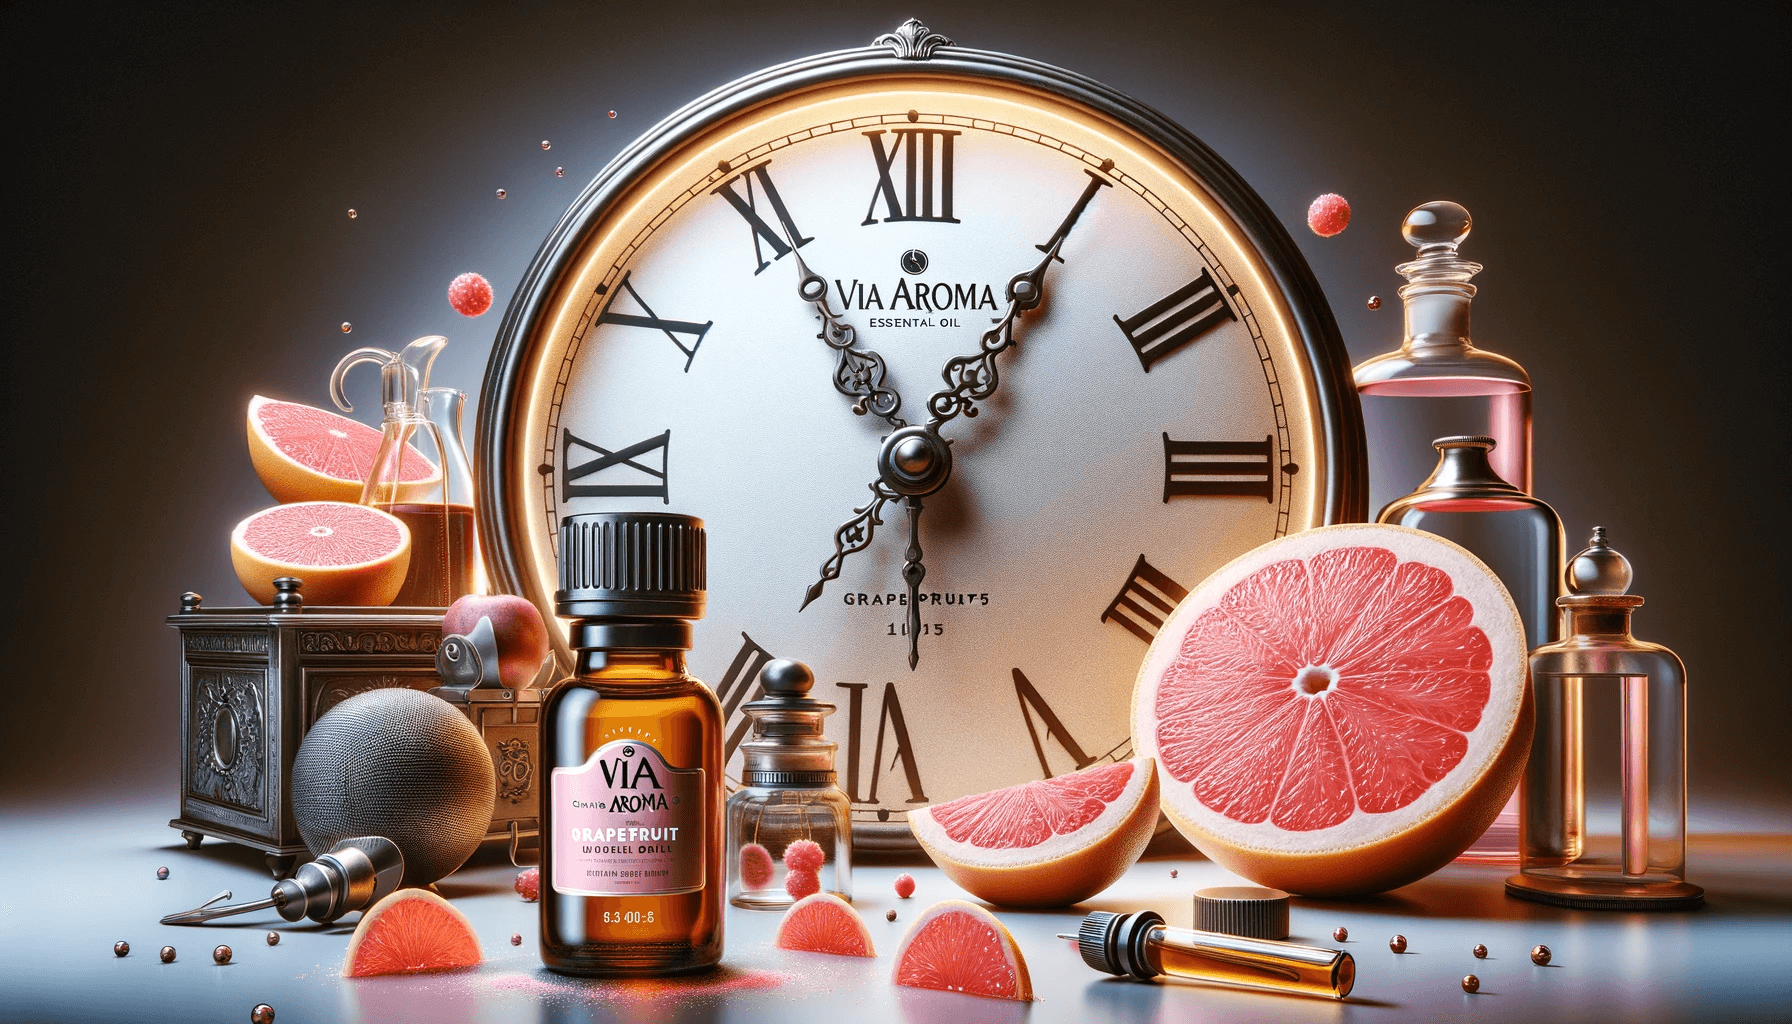 DALL·E 2024 01 23 15.59.17 Create a composition that beautifully merges Via Aroma grapefruit essential oil with the imagery of a clock symbolizing the timely benefits and effec